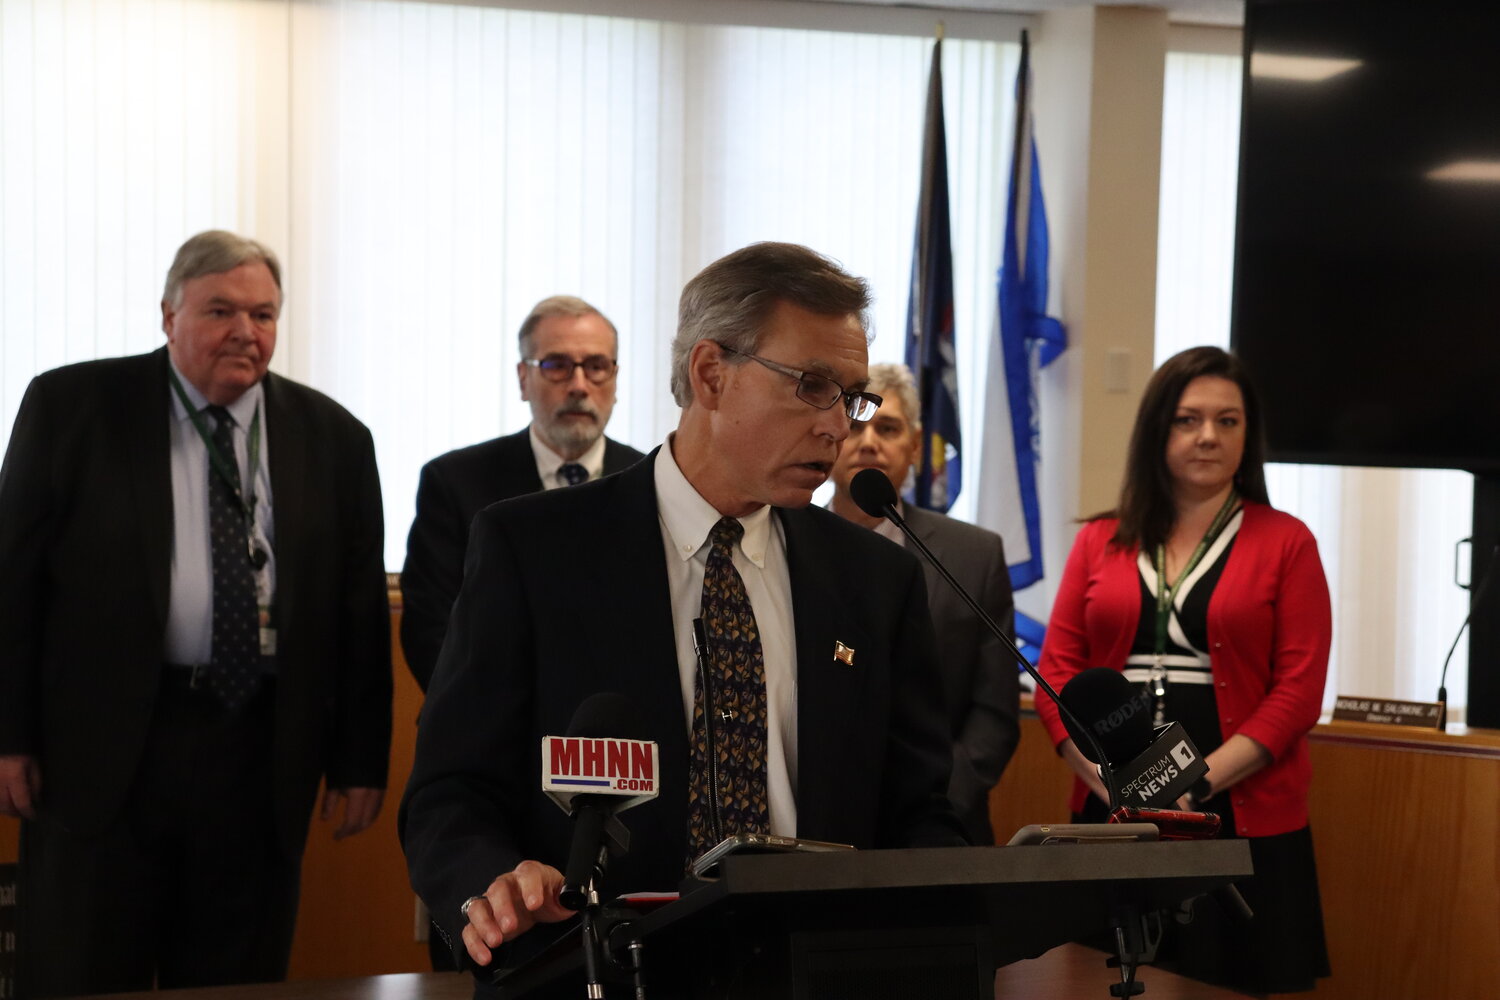 Sullivan County county attorney Michael McGuire speaks at a press conference on Wednesday, May 24, responding to allegations from Sullivan County Acting District Attorney Brian Conaty.